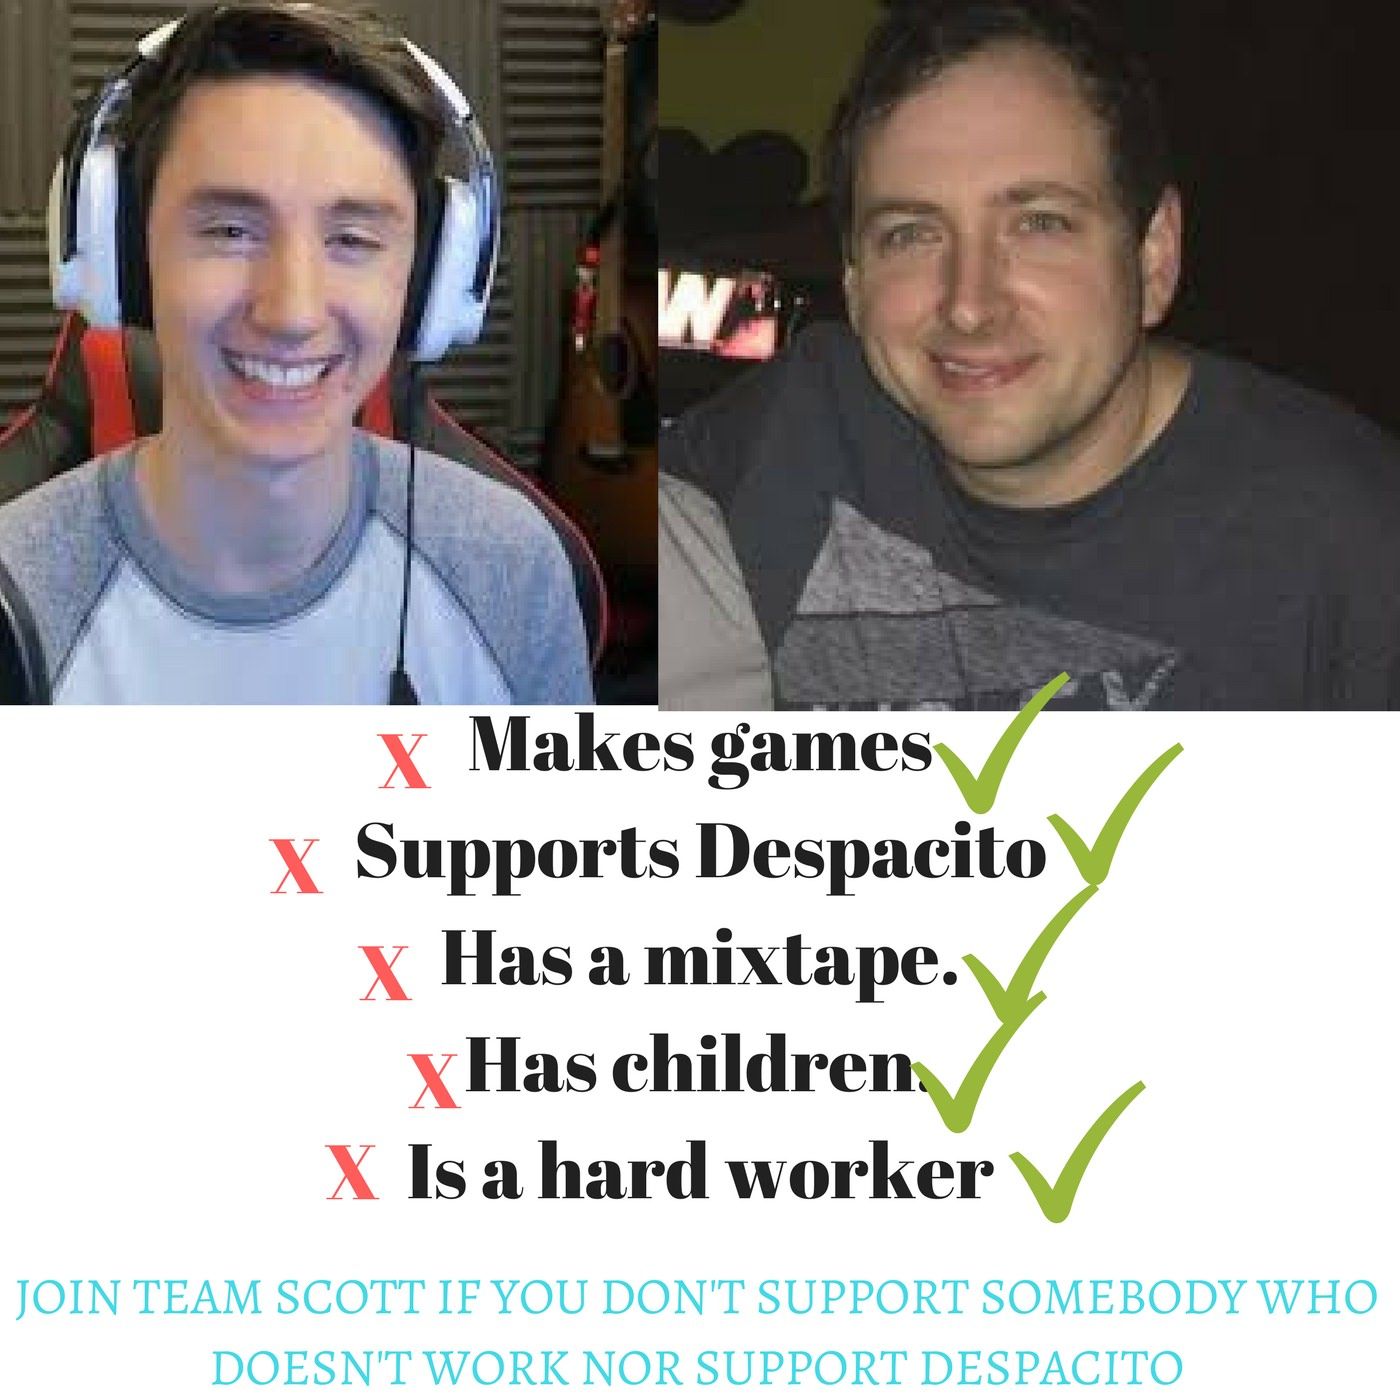 Dawko is Scott Cawthon's younger brother